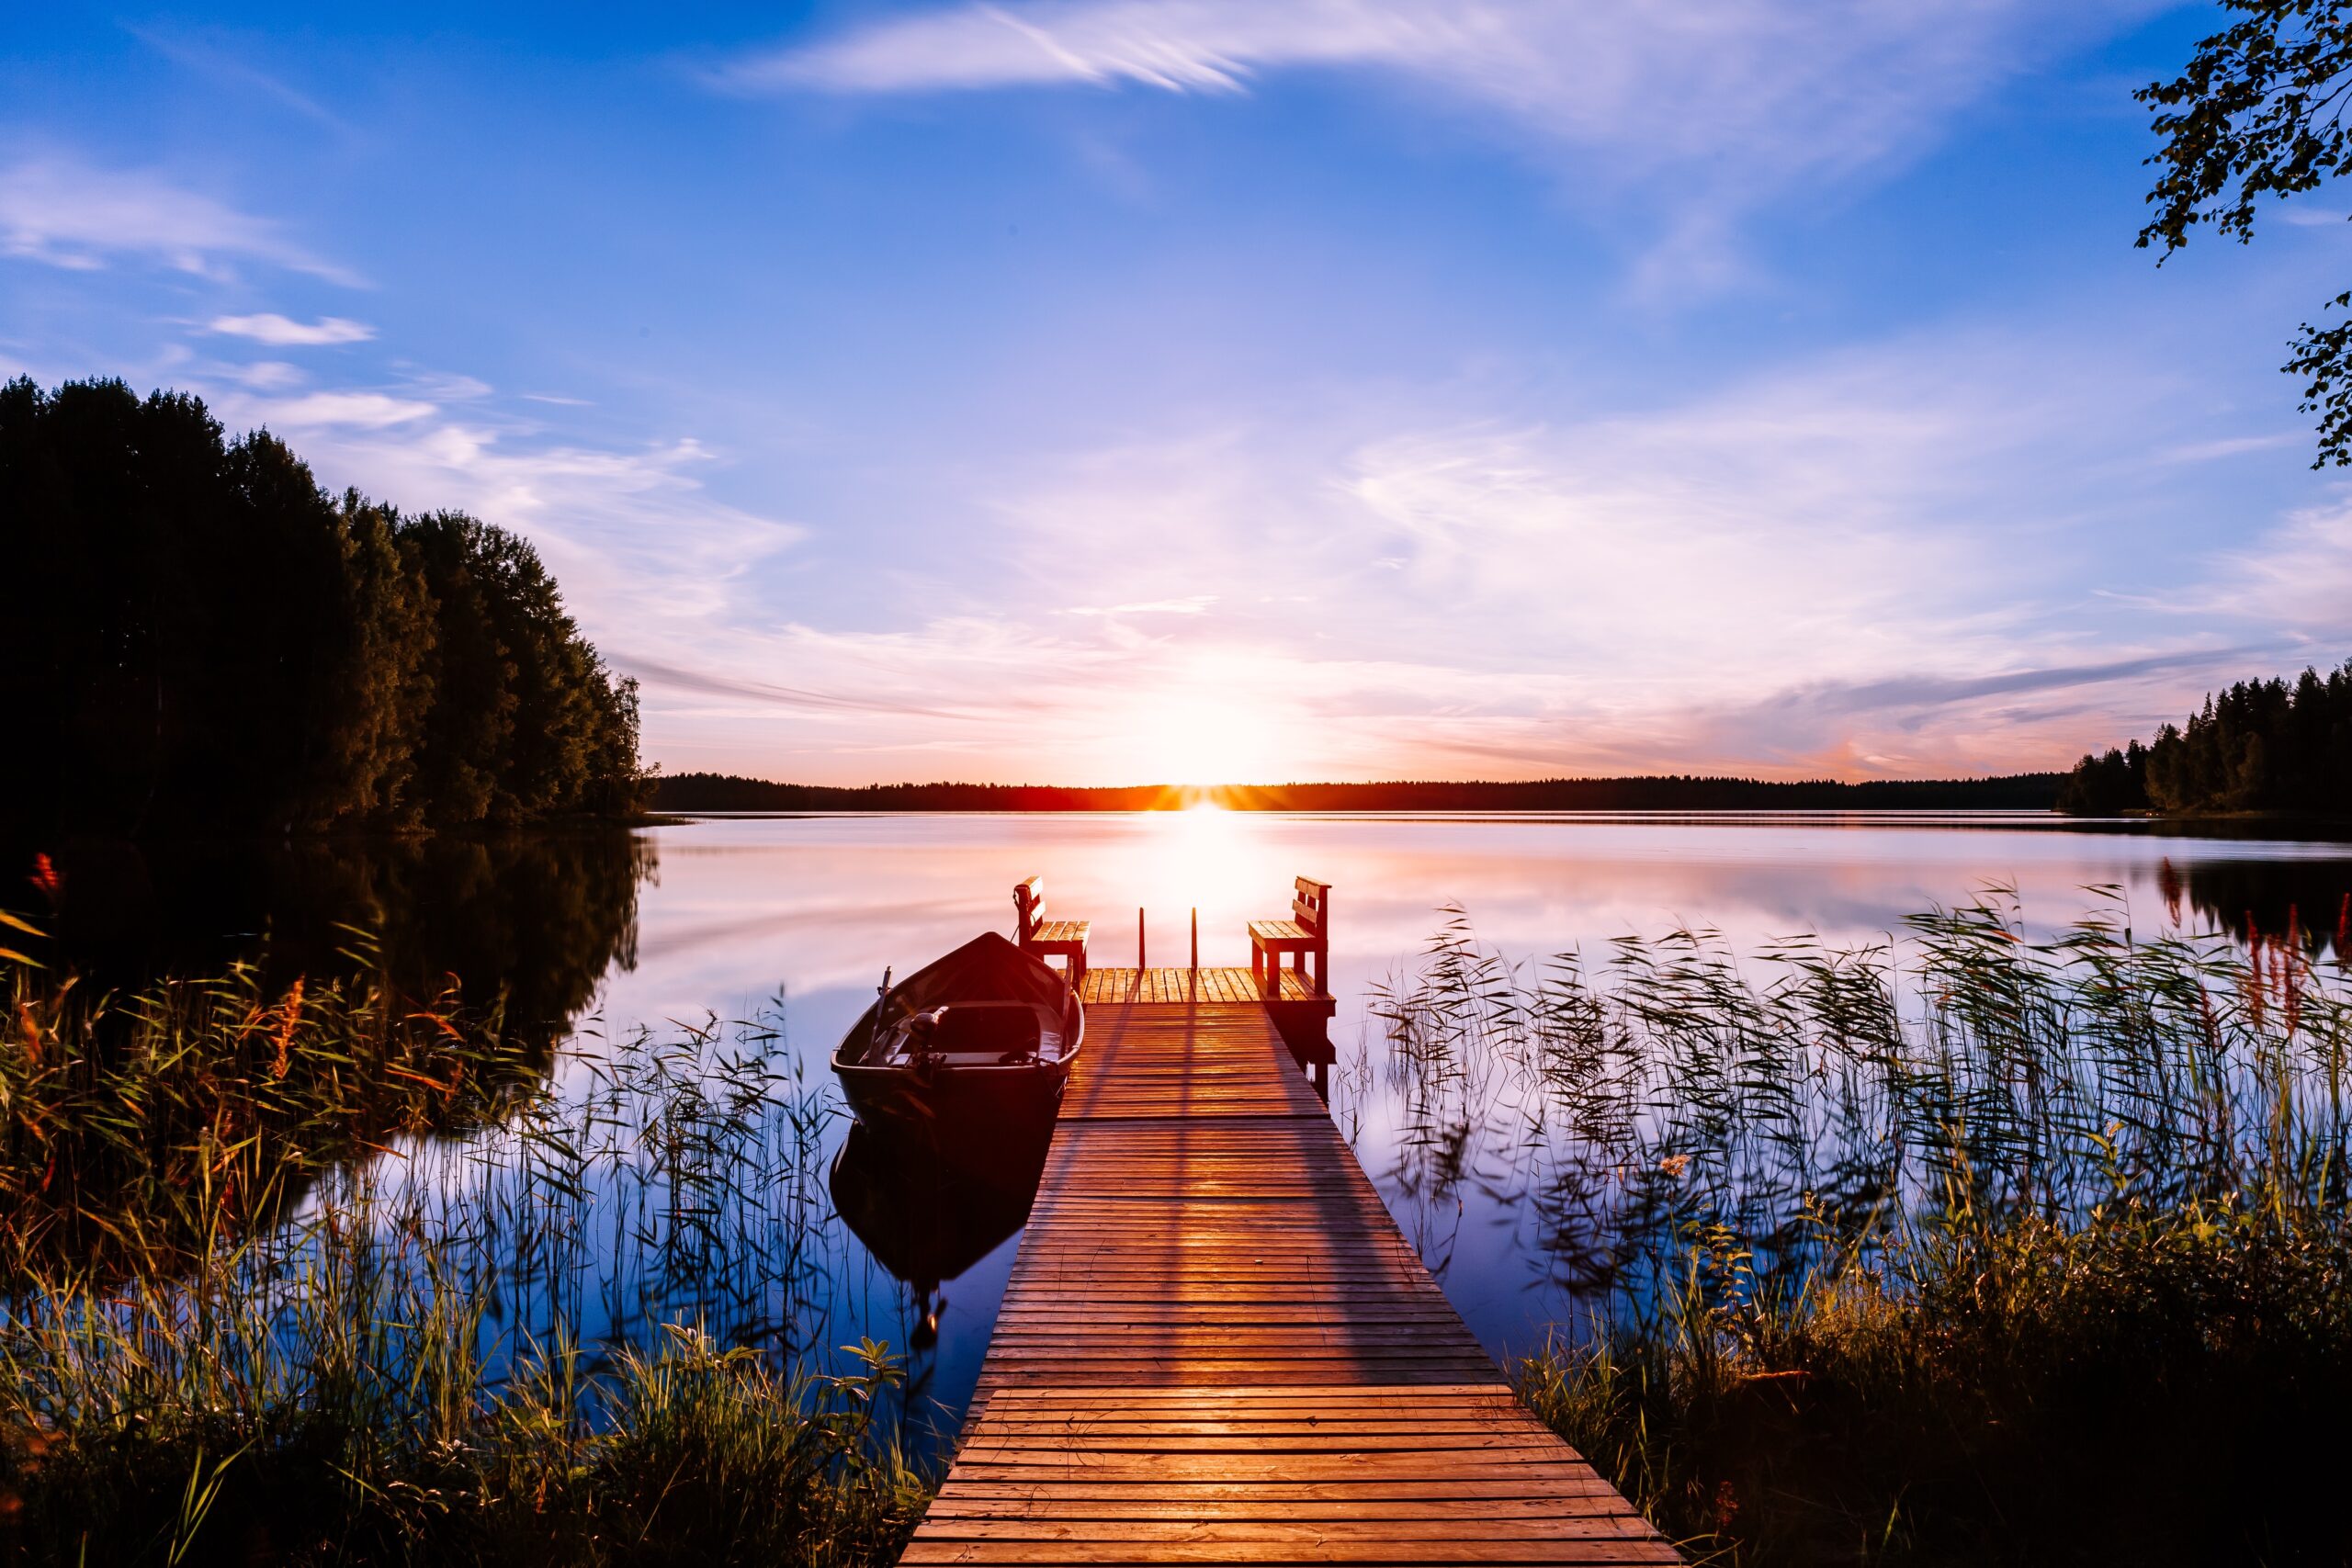 Wooden pier with fishing boat at sunset on a lake